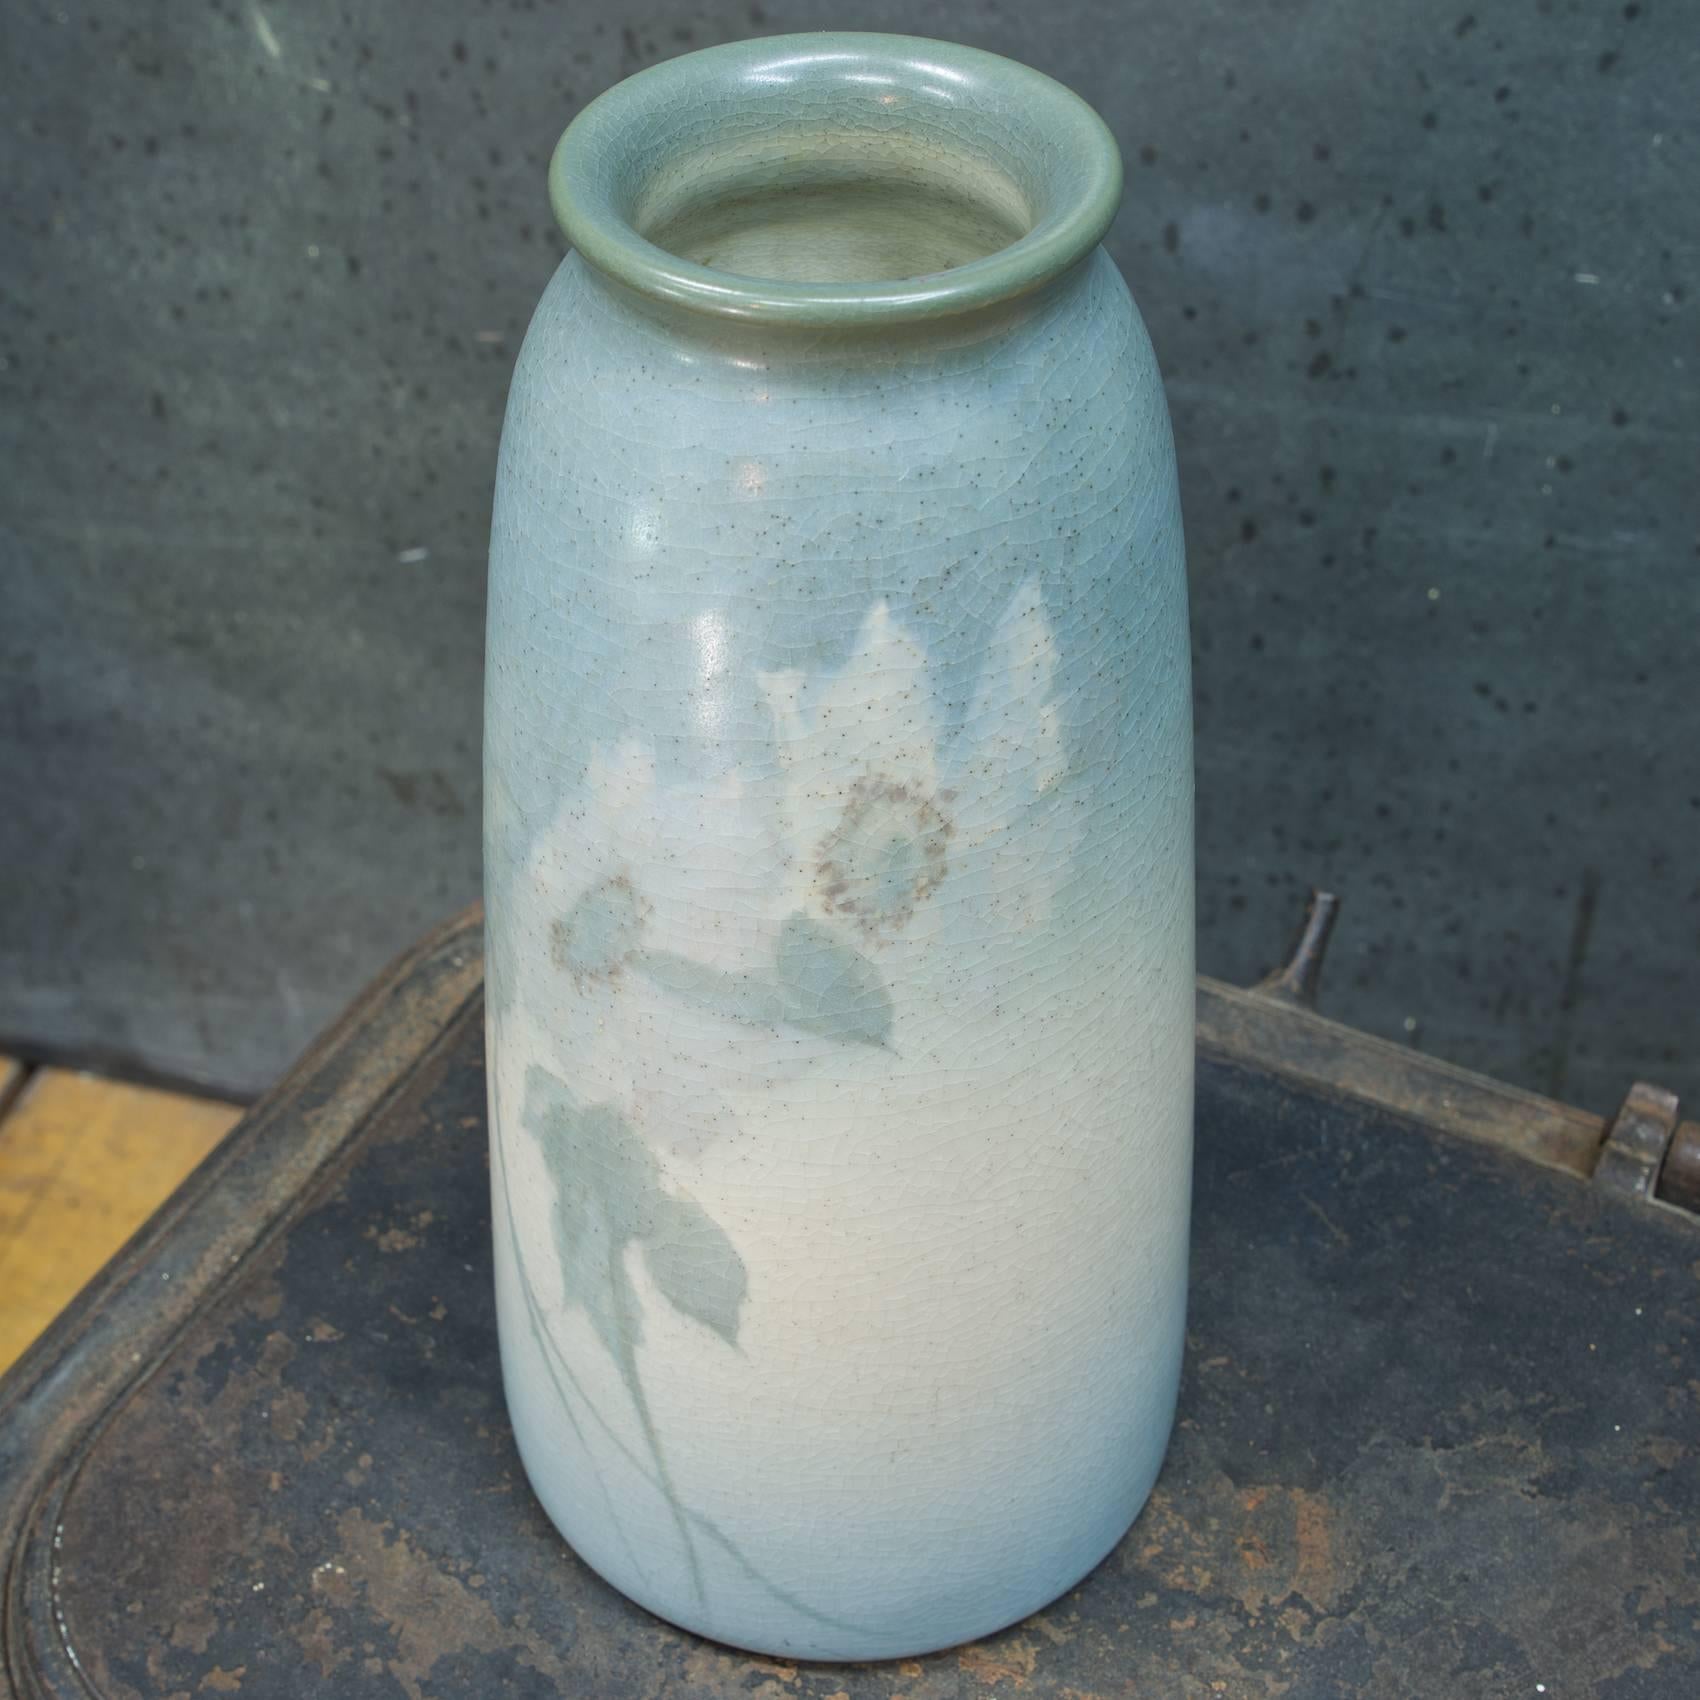 Rookwood Vase, Monumental tapered shape in a Vellum glaze with a beautiful wild rose design, executed by Fred Rothenbusch in 1914, No.1653.

Bottom Dia: 4.75 x Top Dia: 3 x H: 10 in.
